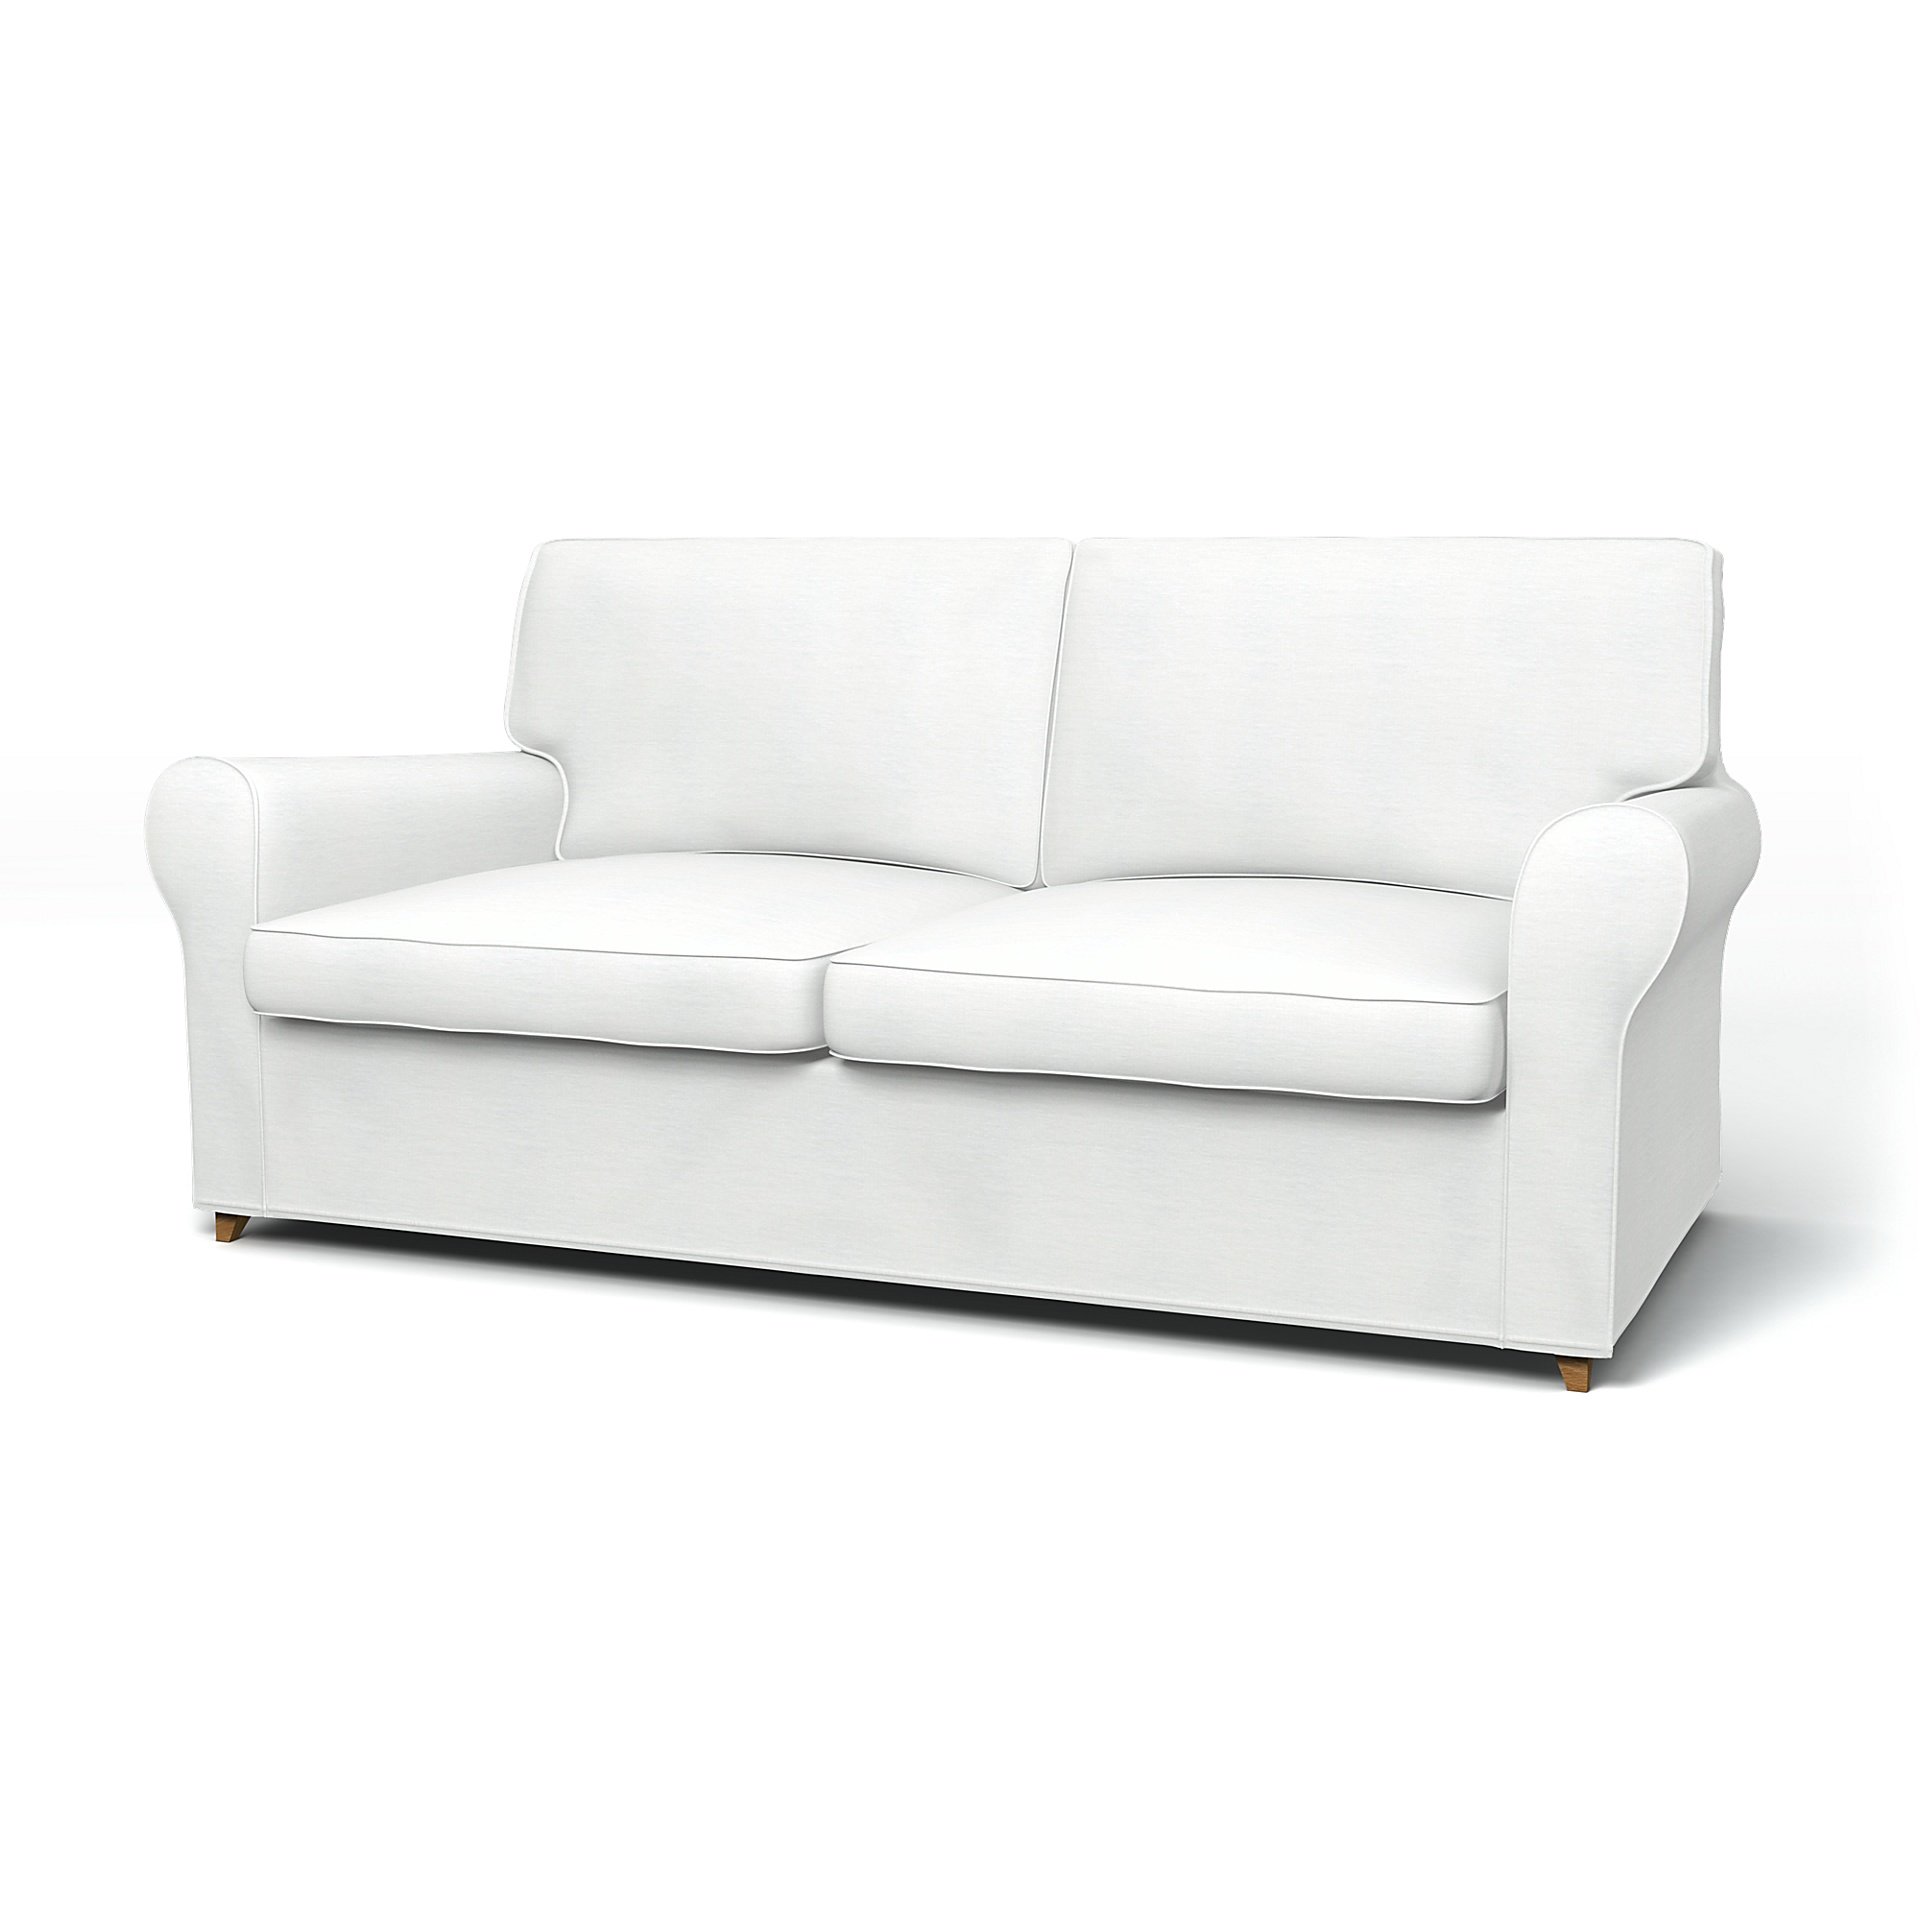 IKEA - Angby Sofa Bed Cover, White, Linen - Bemz